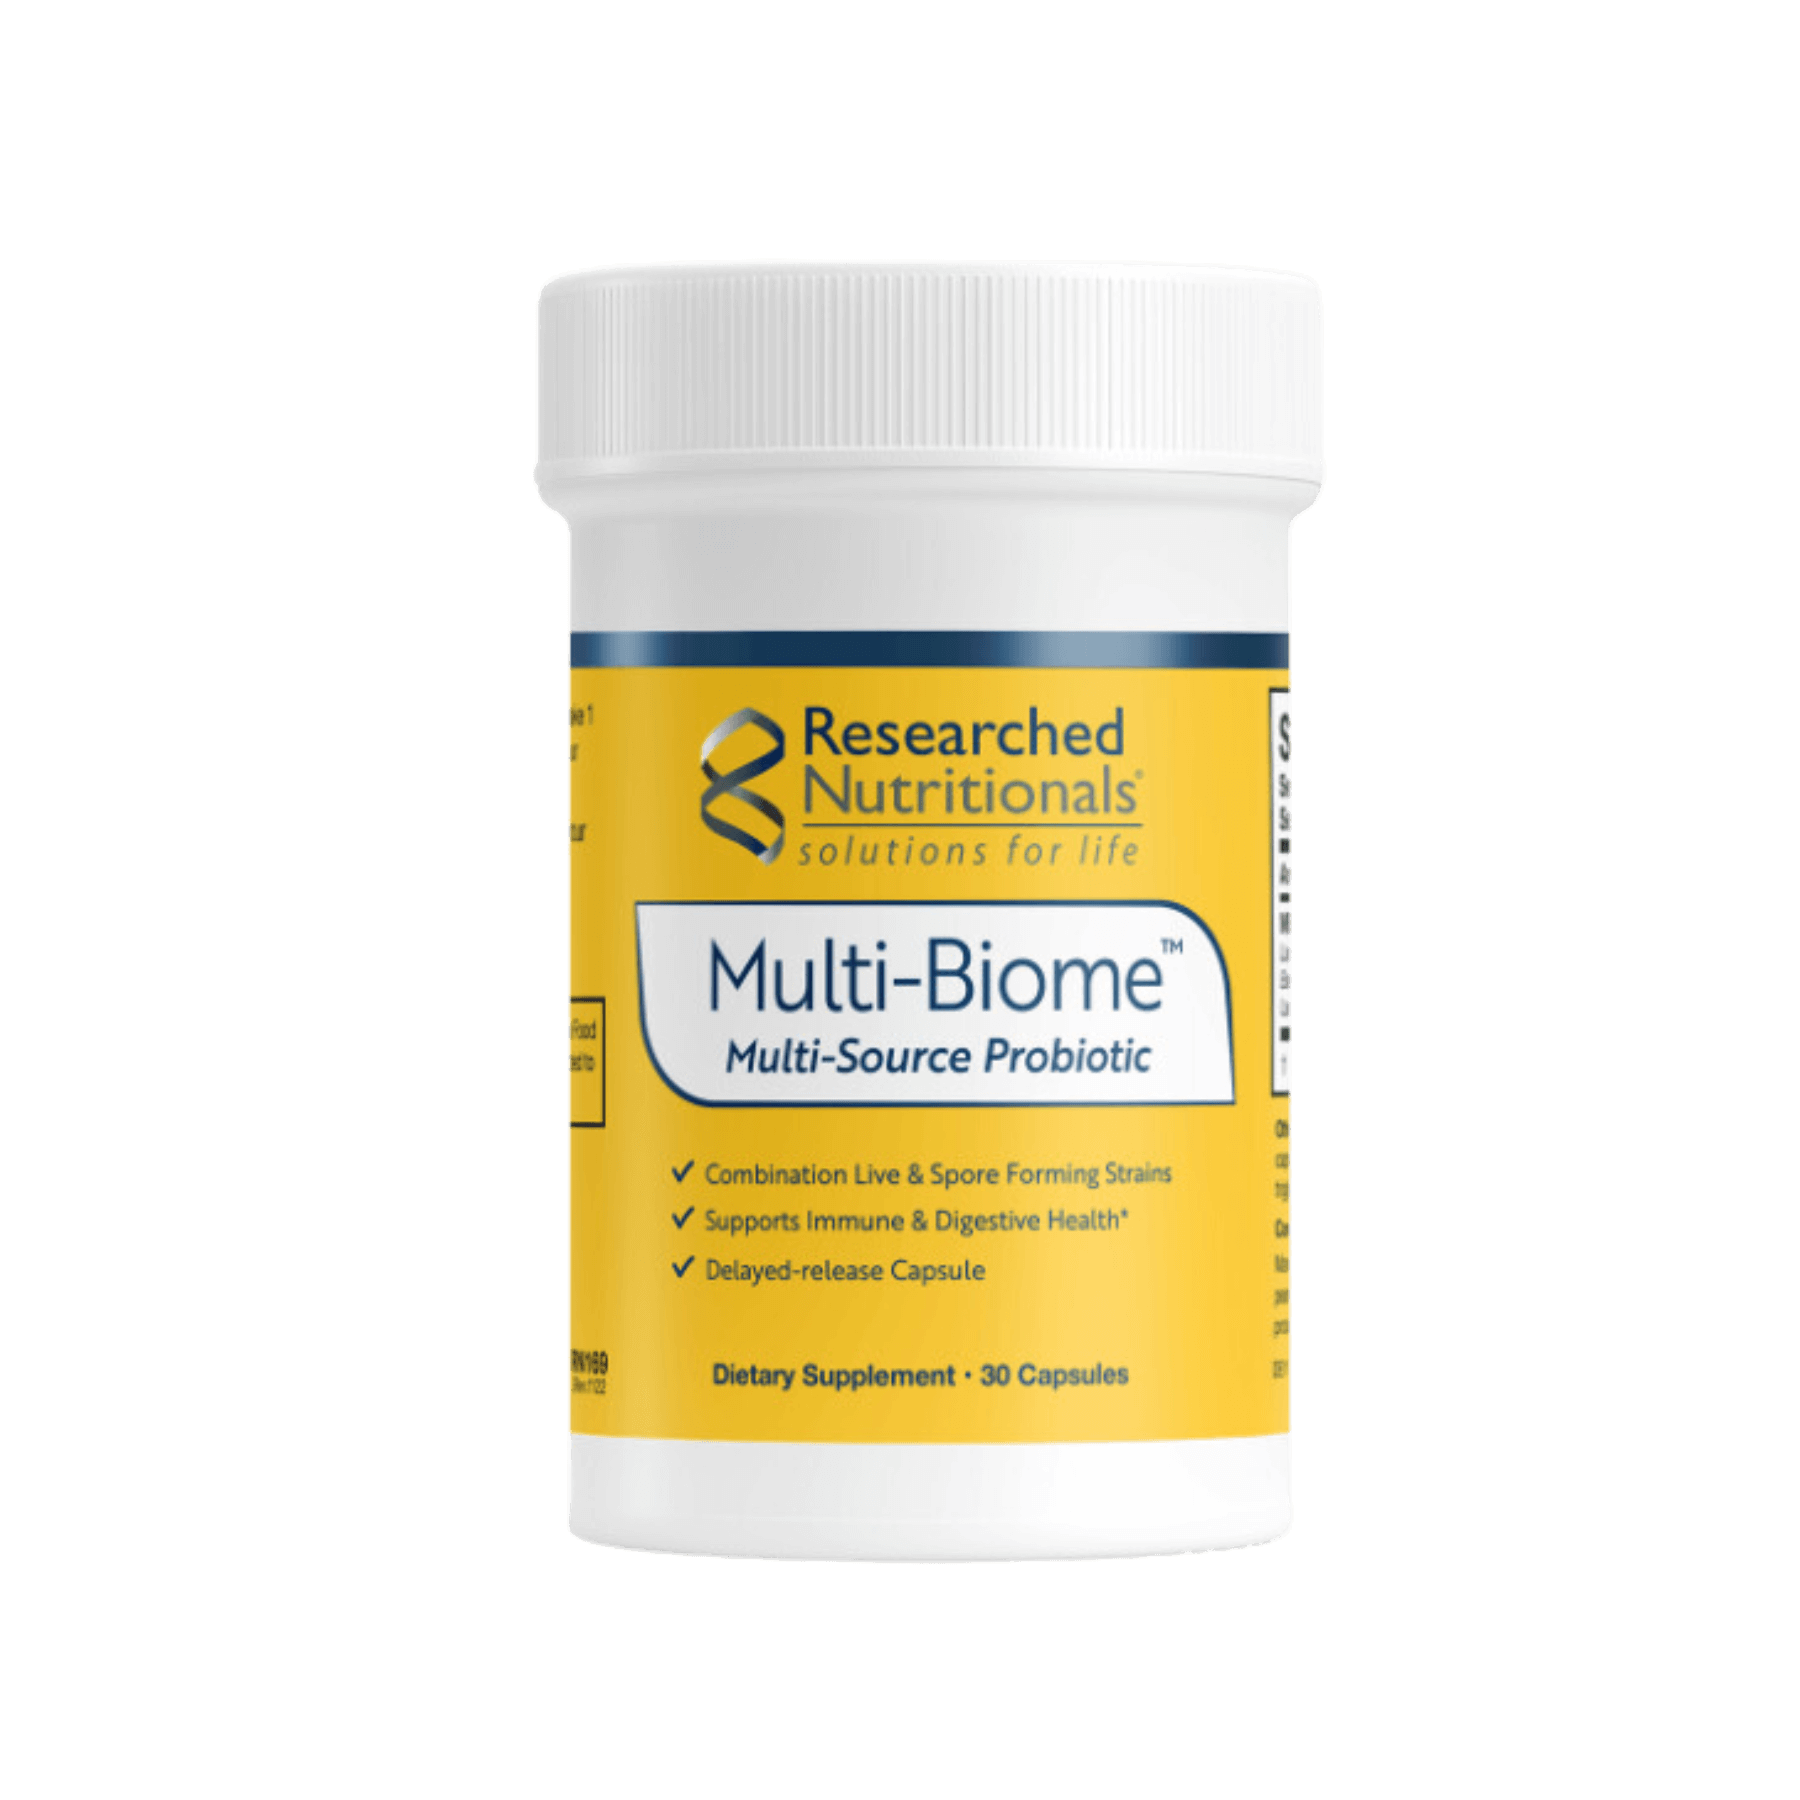 Researched Nutritionals Multi-Biome Probiotic Capsules